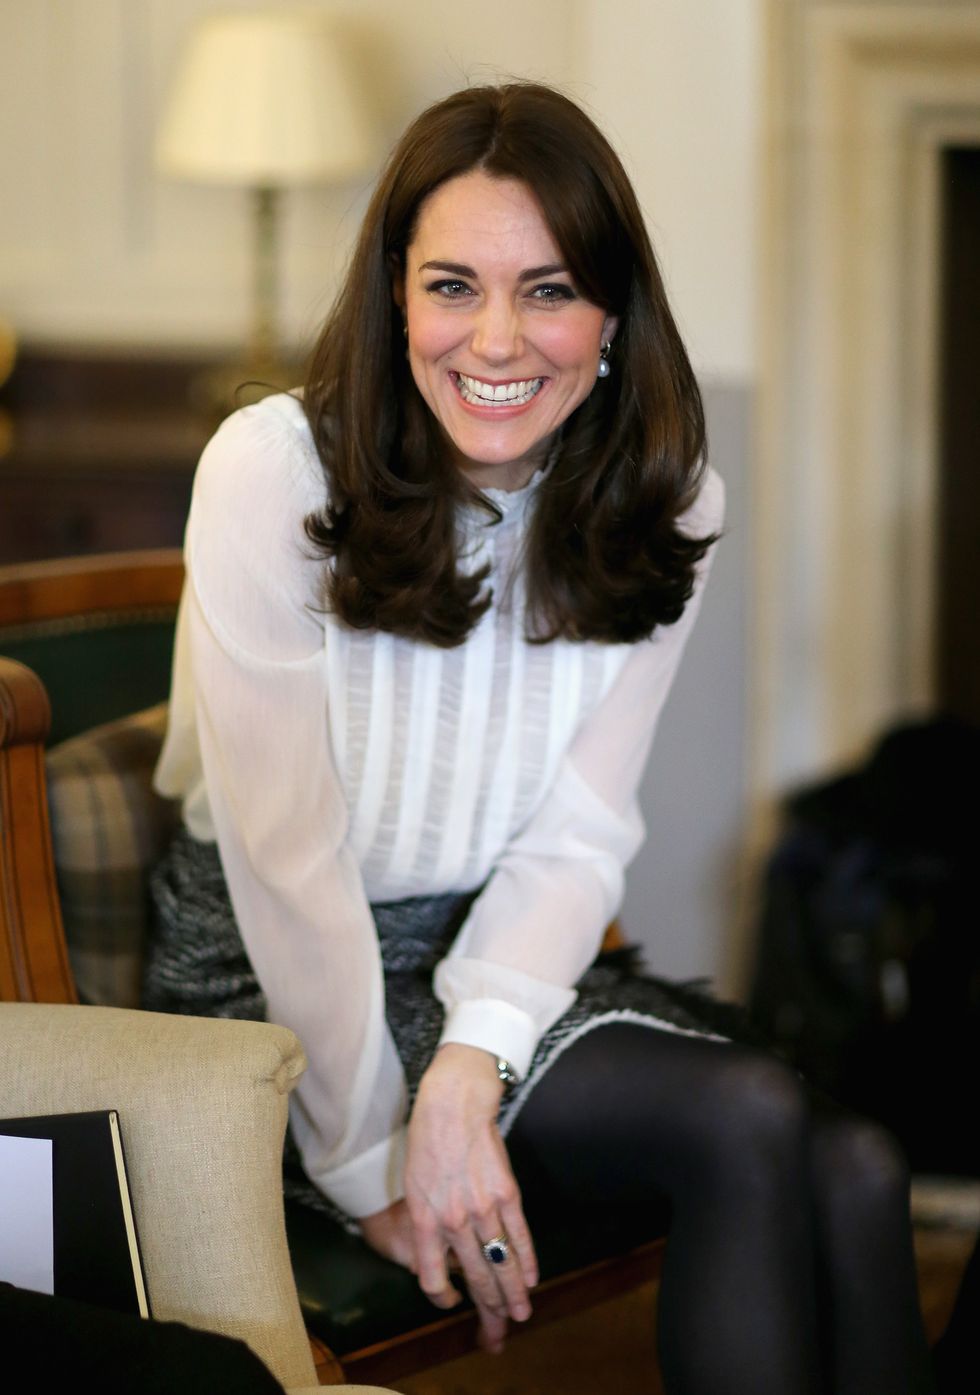 LONDON, ENGLAND - FEBRUARY 17:  Catherine, Duchess of Cambridge talks to children from the 'Real Truth' video blog that features on the Huffington Post website at Kensington Palace on February 17, 2016 in London, England. The Duchess of Cambridge is supporting the launch of the Huffington Post UK's initiative 'Young Minds Matter' by guest editing the Huffington Post UK today from Kensington Palace.  (Photo by Chris Jackson - WPA Pool/Getty Images)